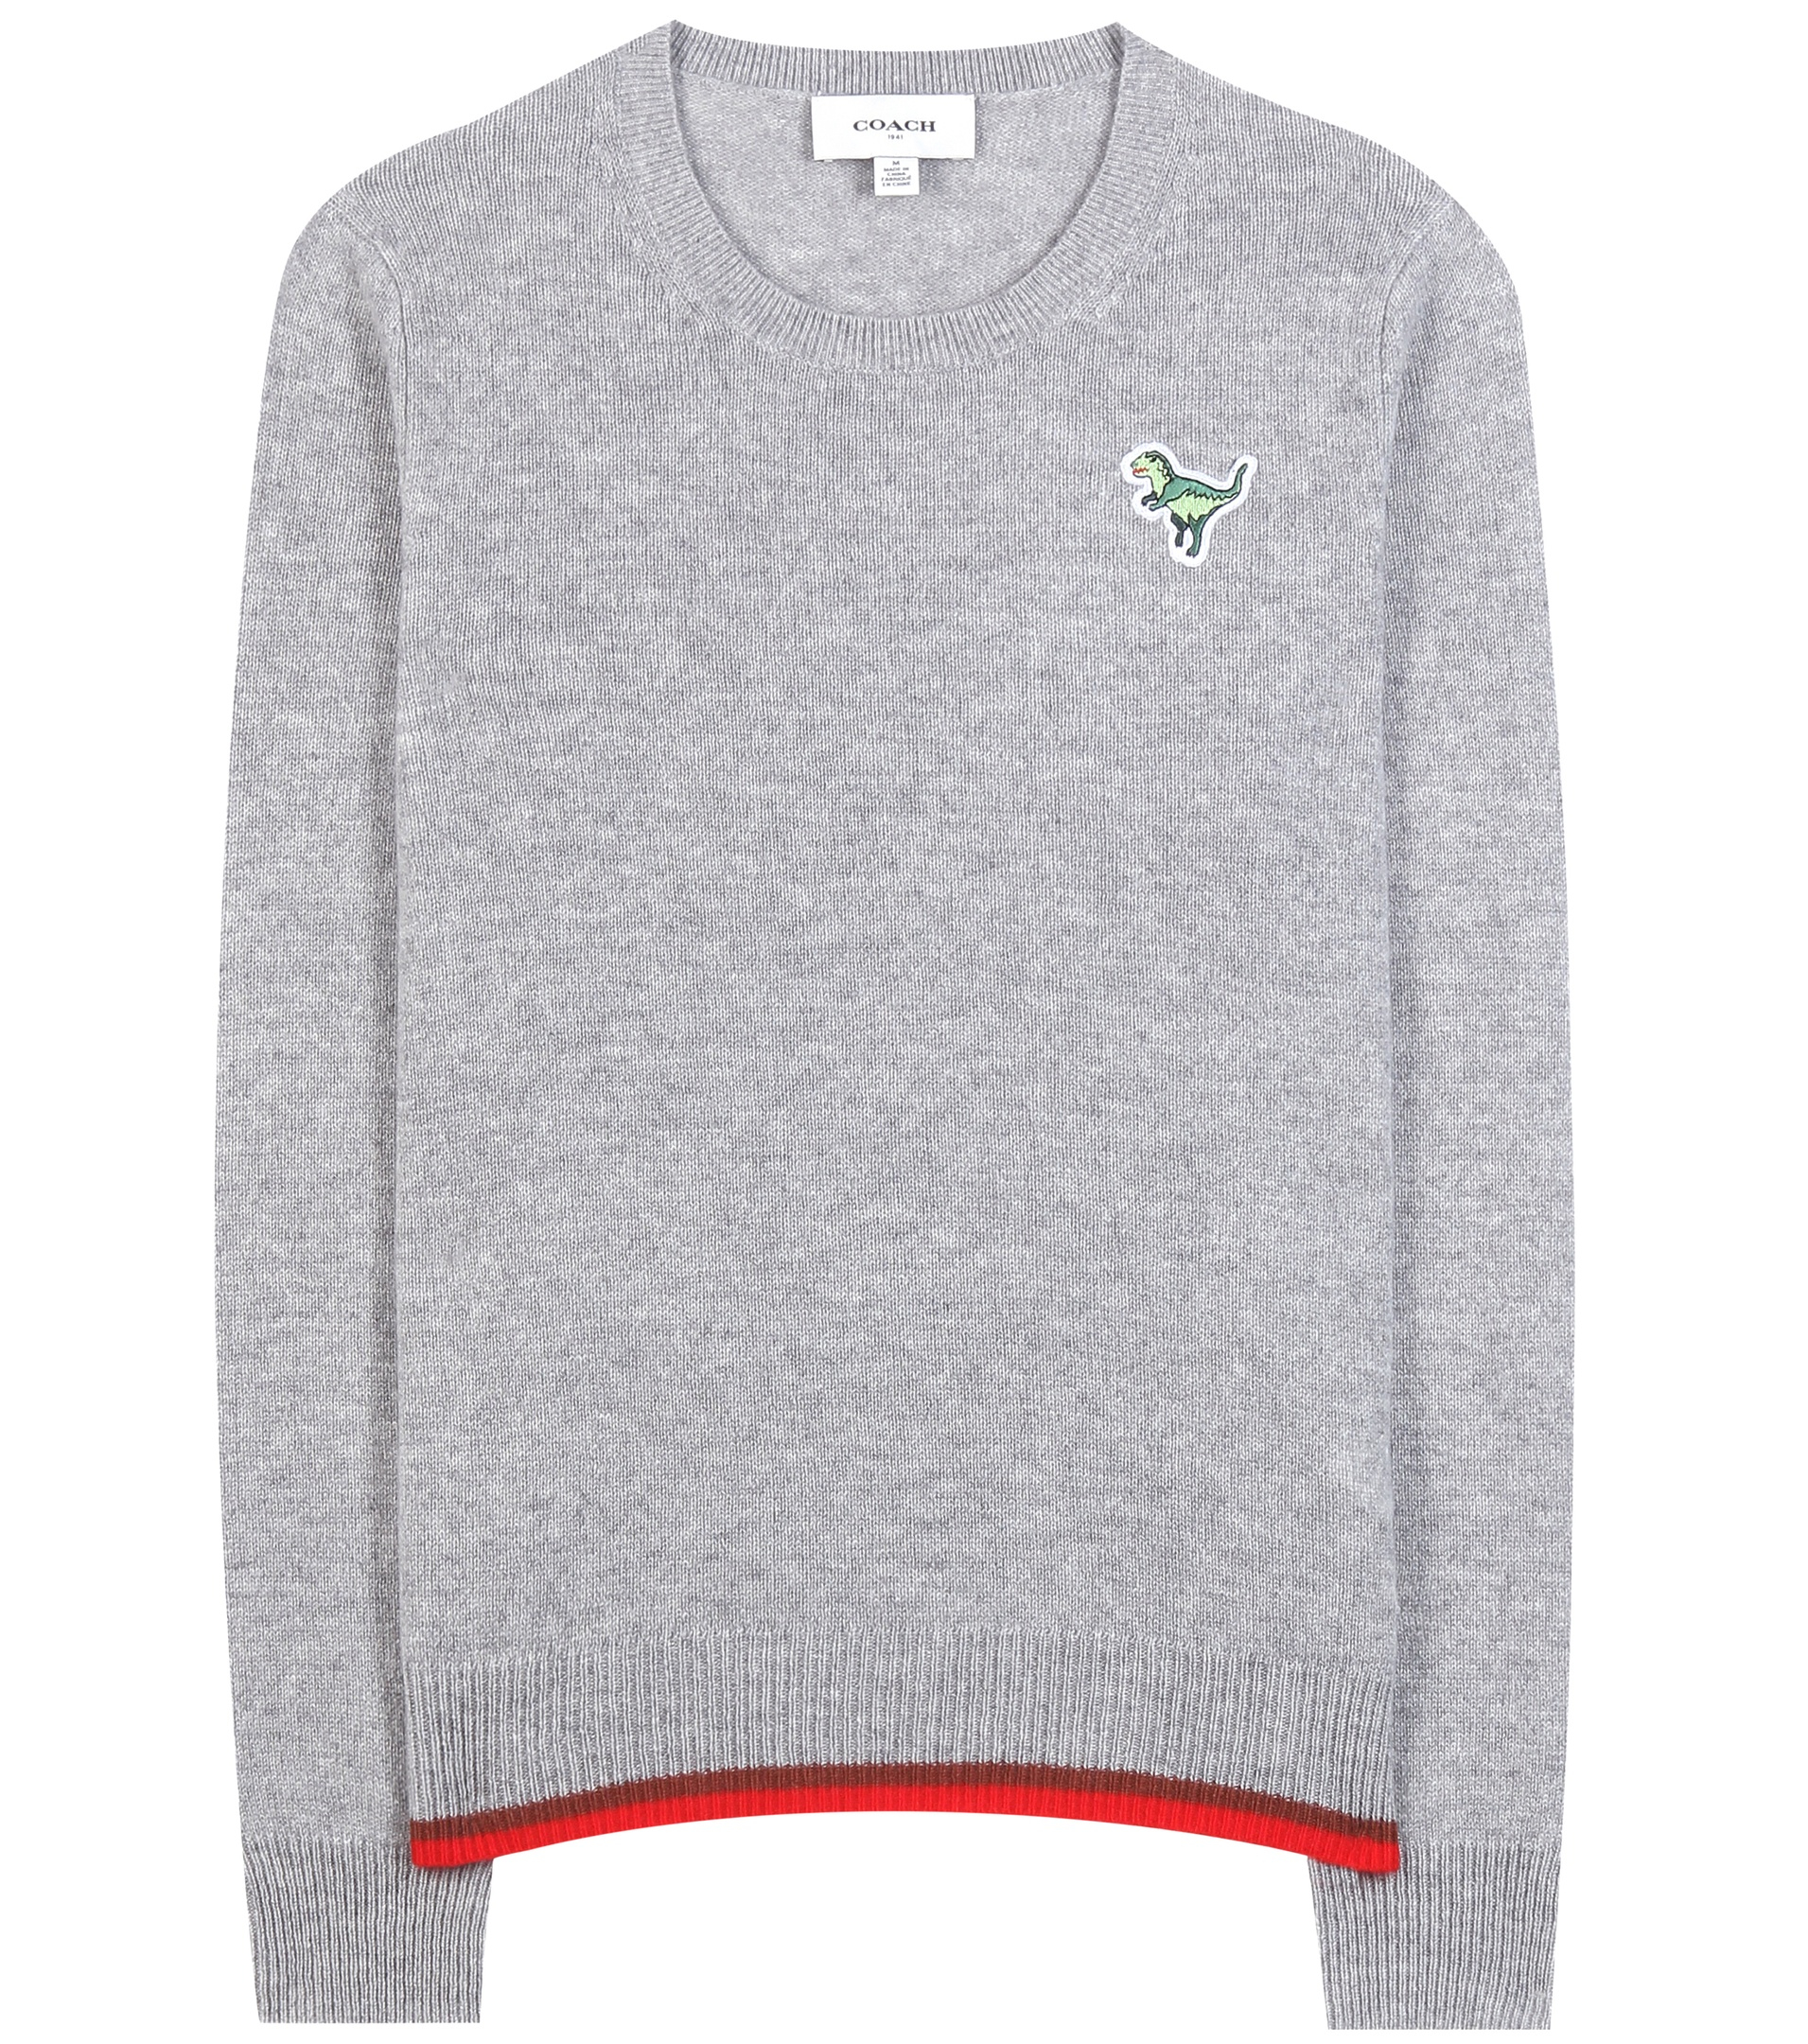 Lyst - COACH Cashmere Sweater With Embroidered Appliqué in Gray